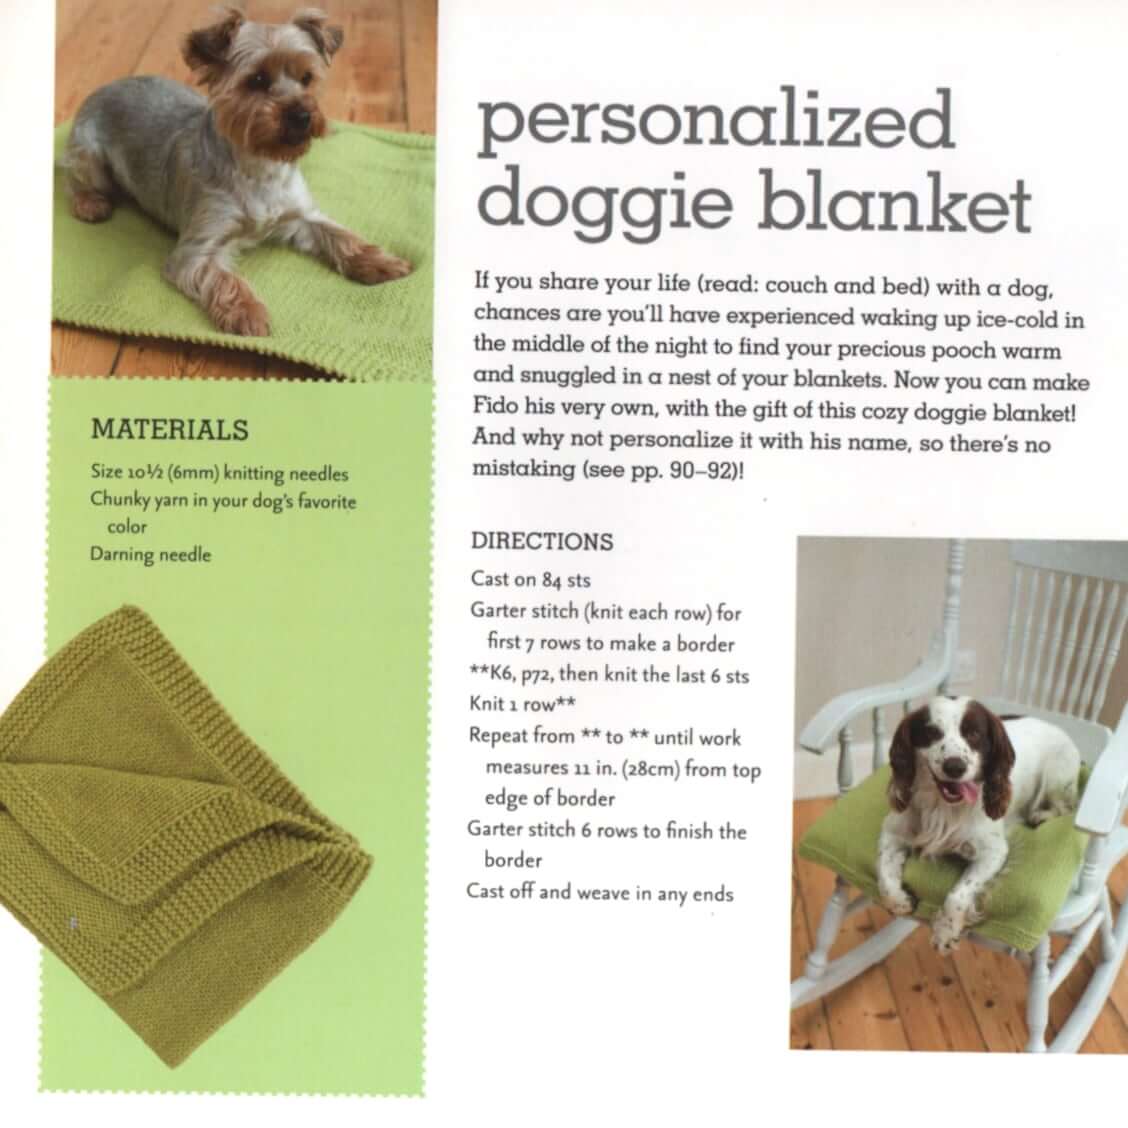 Pampered pooch: Addresses and accessories for your dog